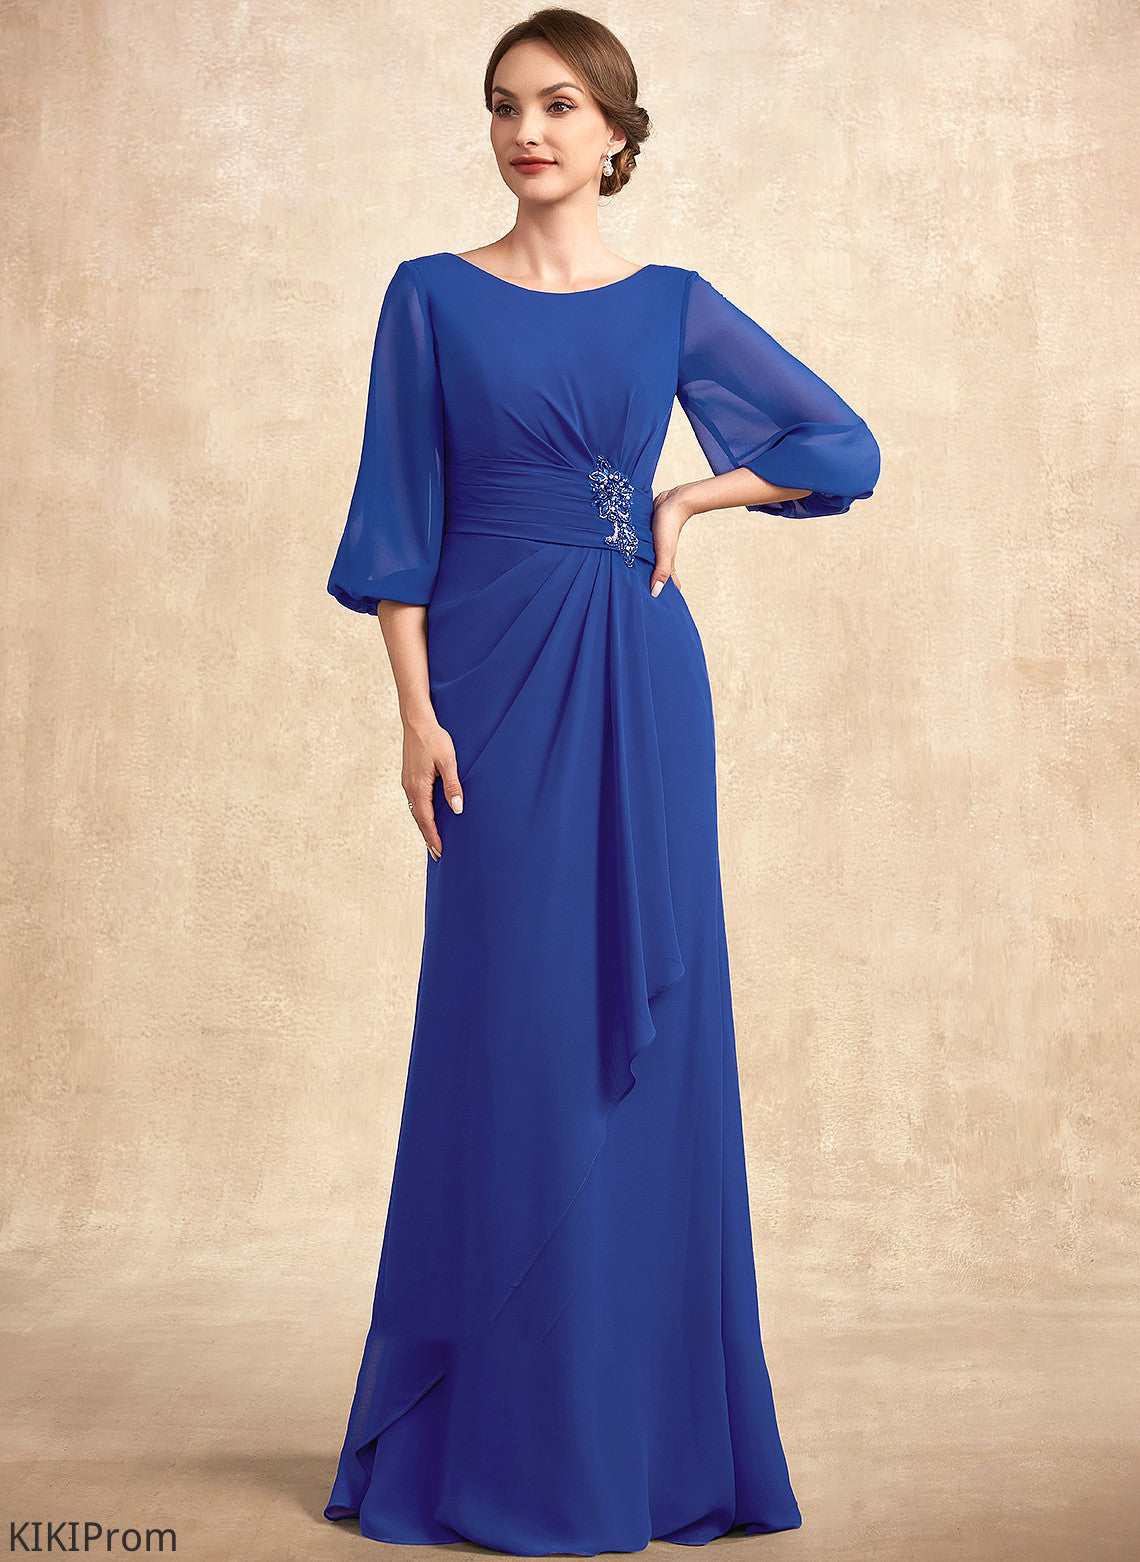 the Dress Floor-Length Neck Mother of the Bride Dresses A-Line Bride Maya of Scoop Ruffle Beading Mother Chiffon With